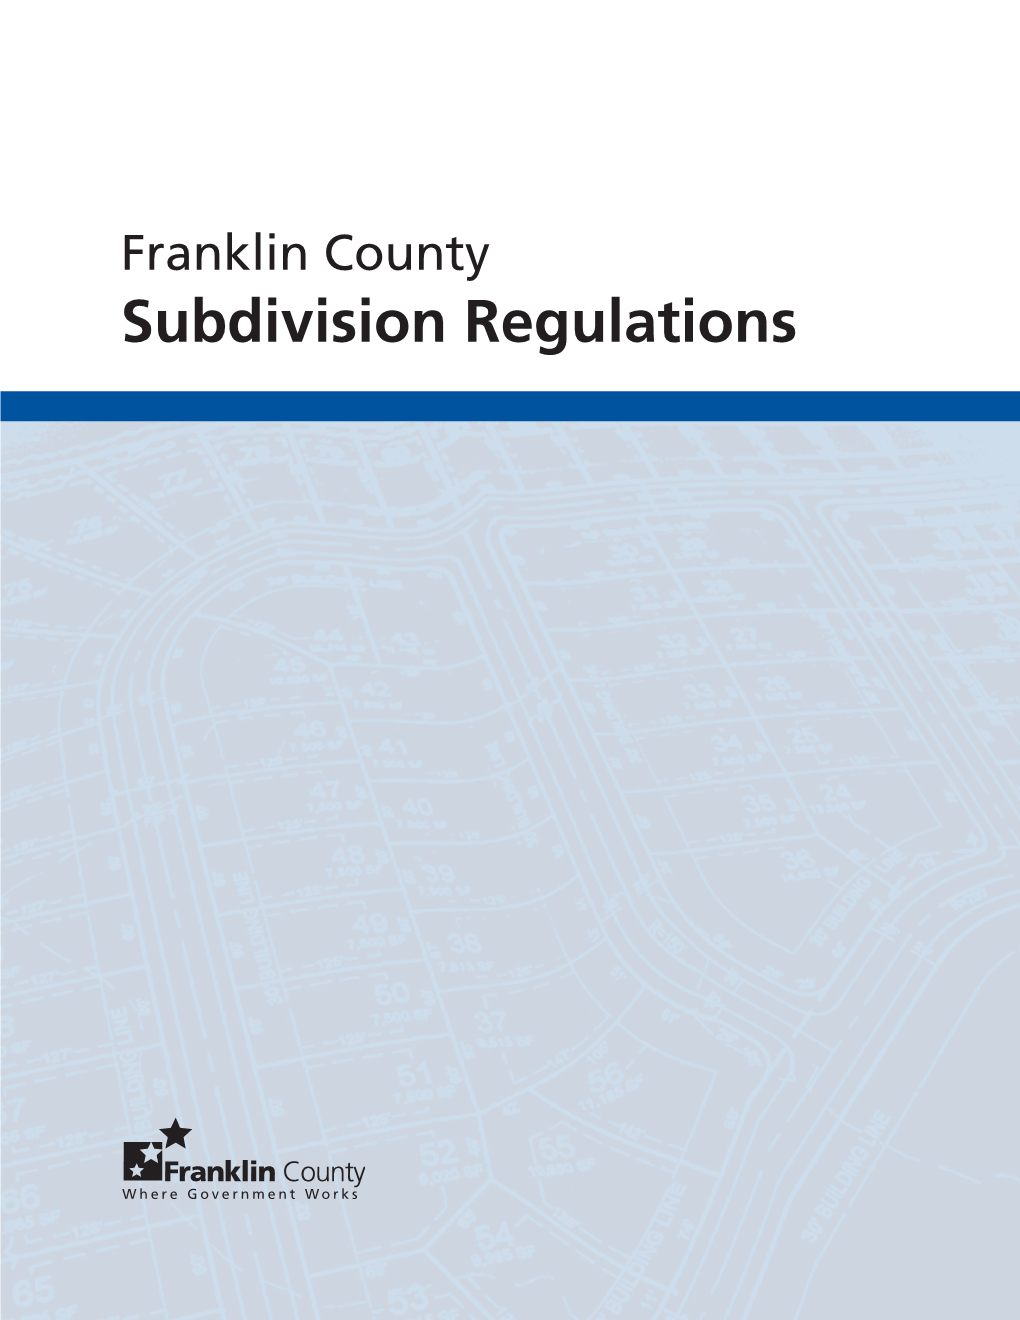 Subdivision Regulations Franklin County Subdivision Regulations for Unincorporated Areas of Franklin County, Ohio